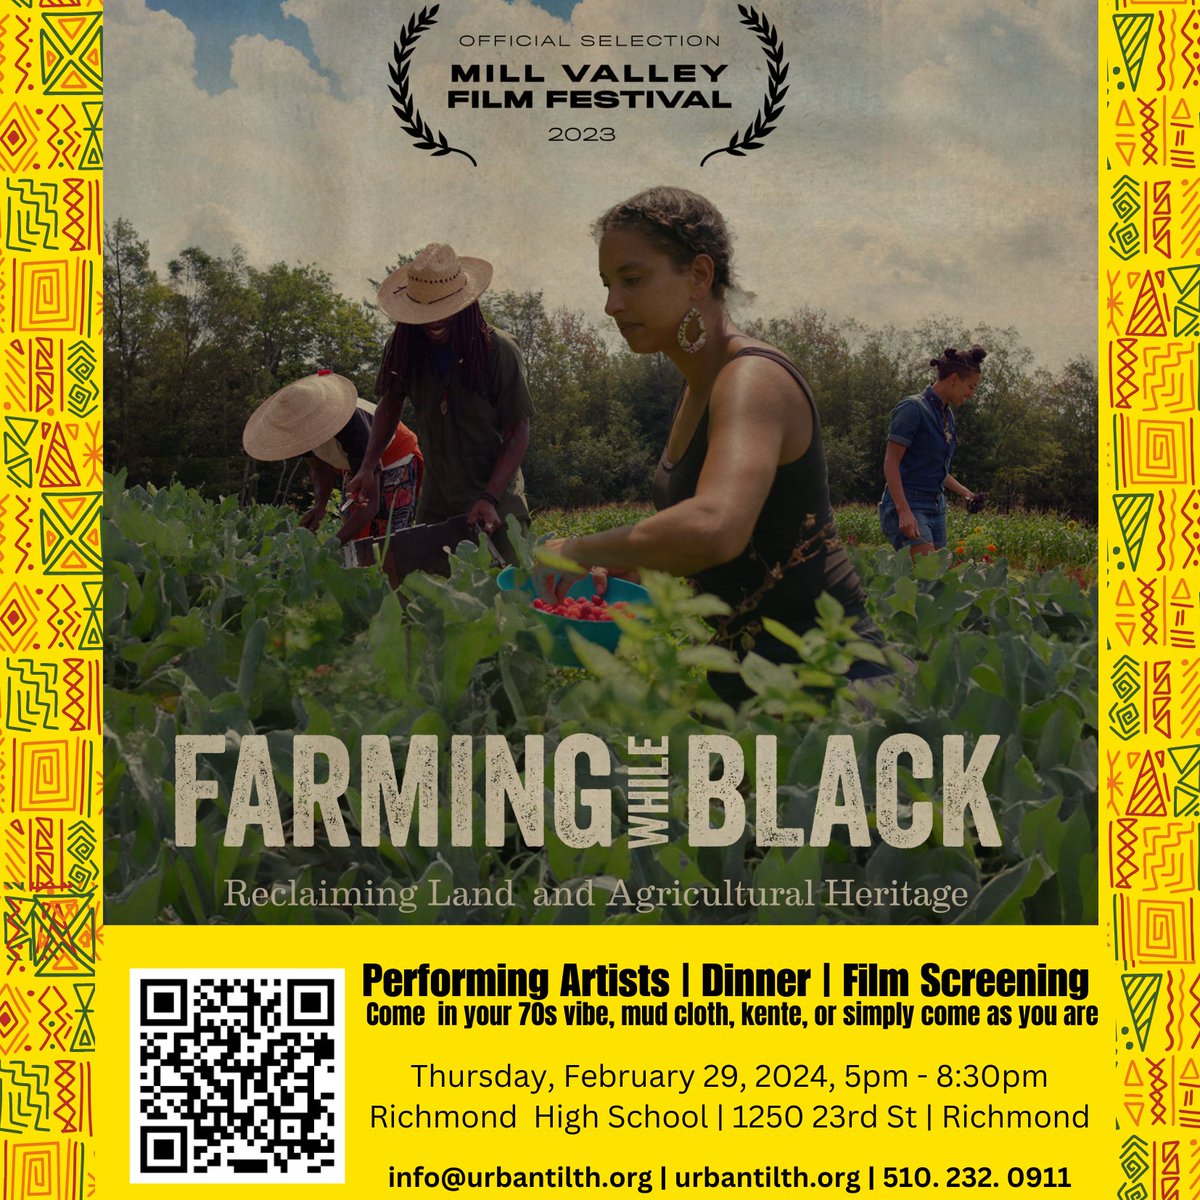 #northrichmonfarm #rhs #kontentfilms Performing artists, good eats, &the screening of Farming While Black! Dress in your 70s vibe, mud cloth, or come as you are. Join us as we celebrate the history & future of Black culture. Come & be in community with us! bit.ly/4bPkNPO